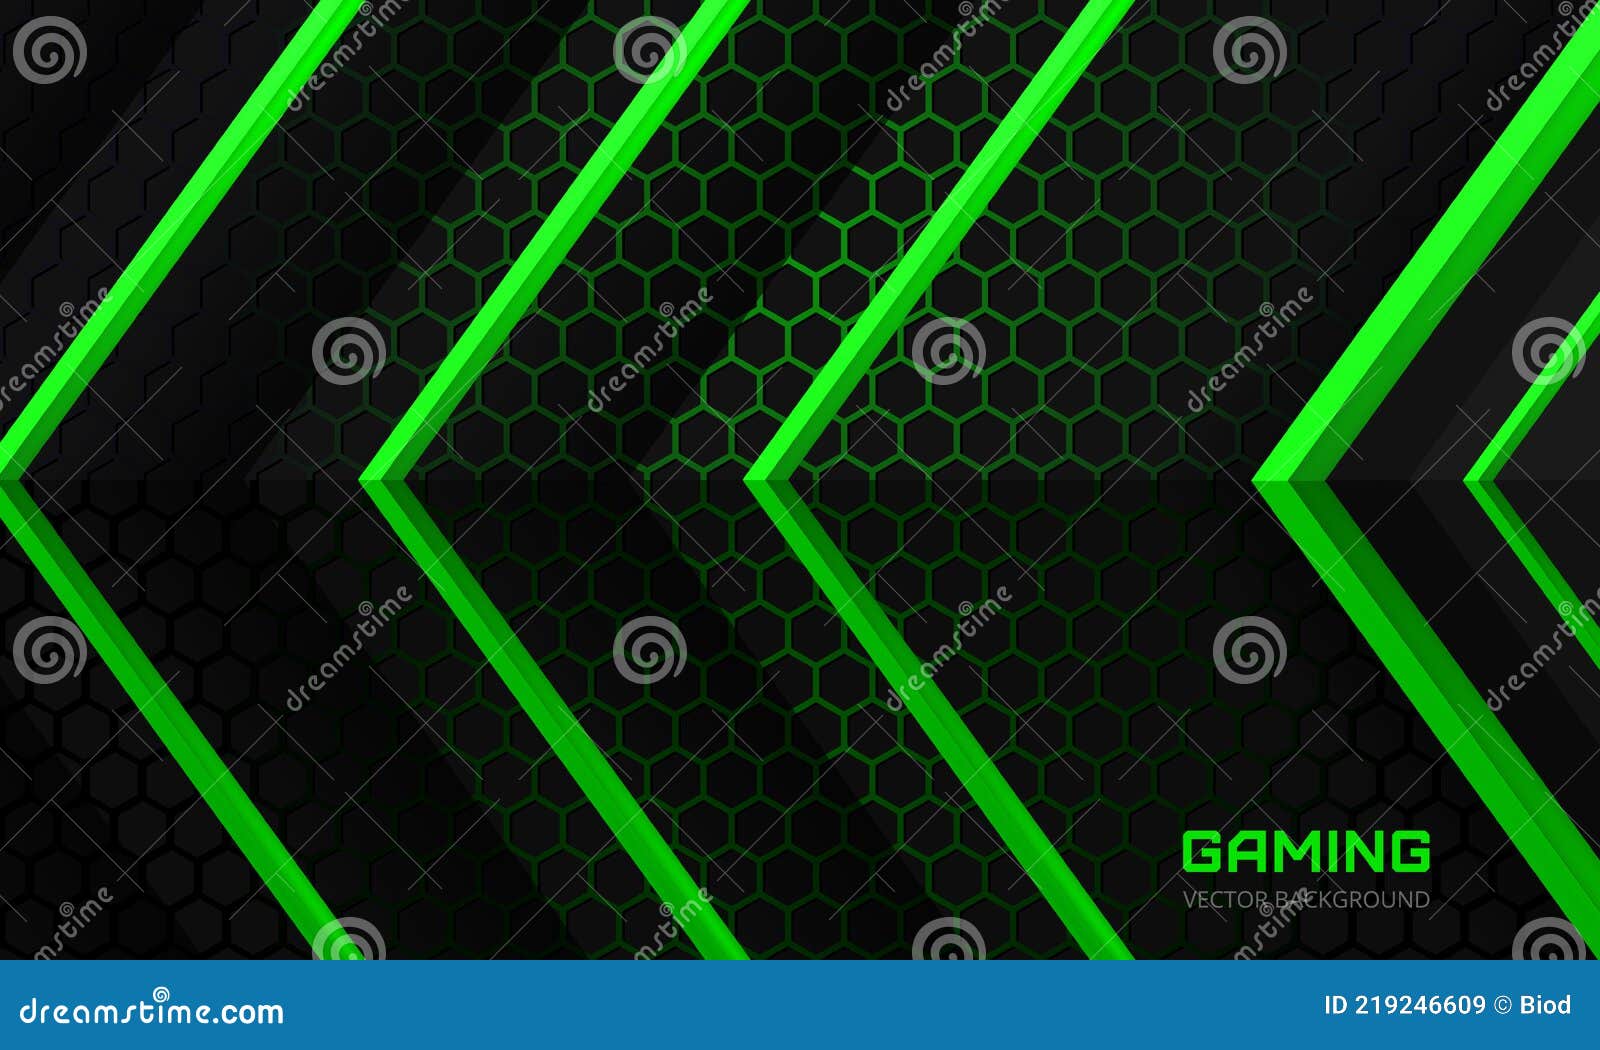 Dark Gaming Background with Green Arrows on a Dark Abstract Hexagonal Grid  Stock Vector - Illustration of creative, arrows: 219246609